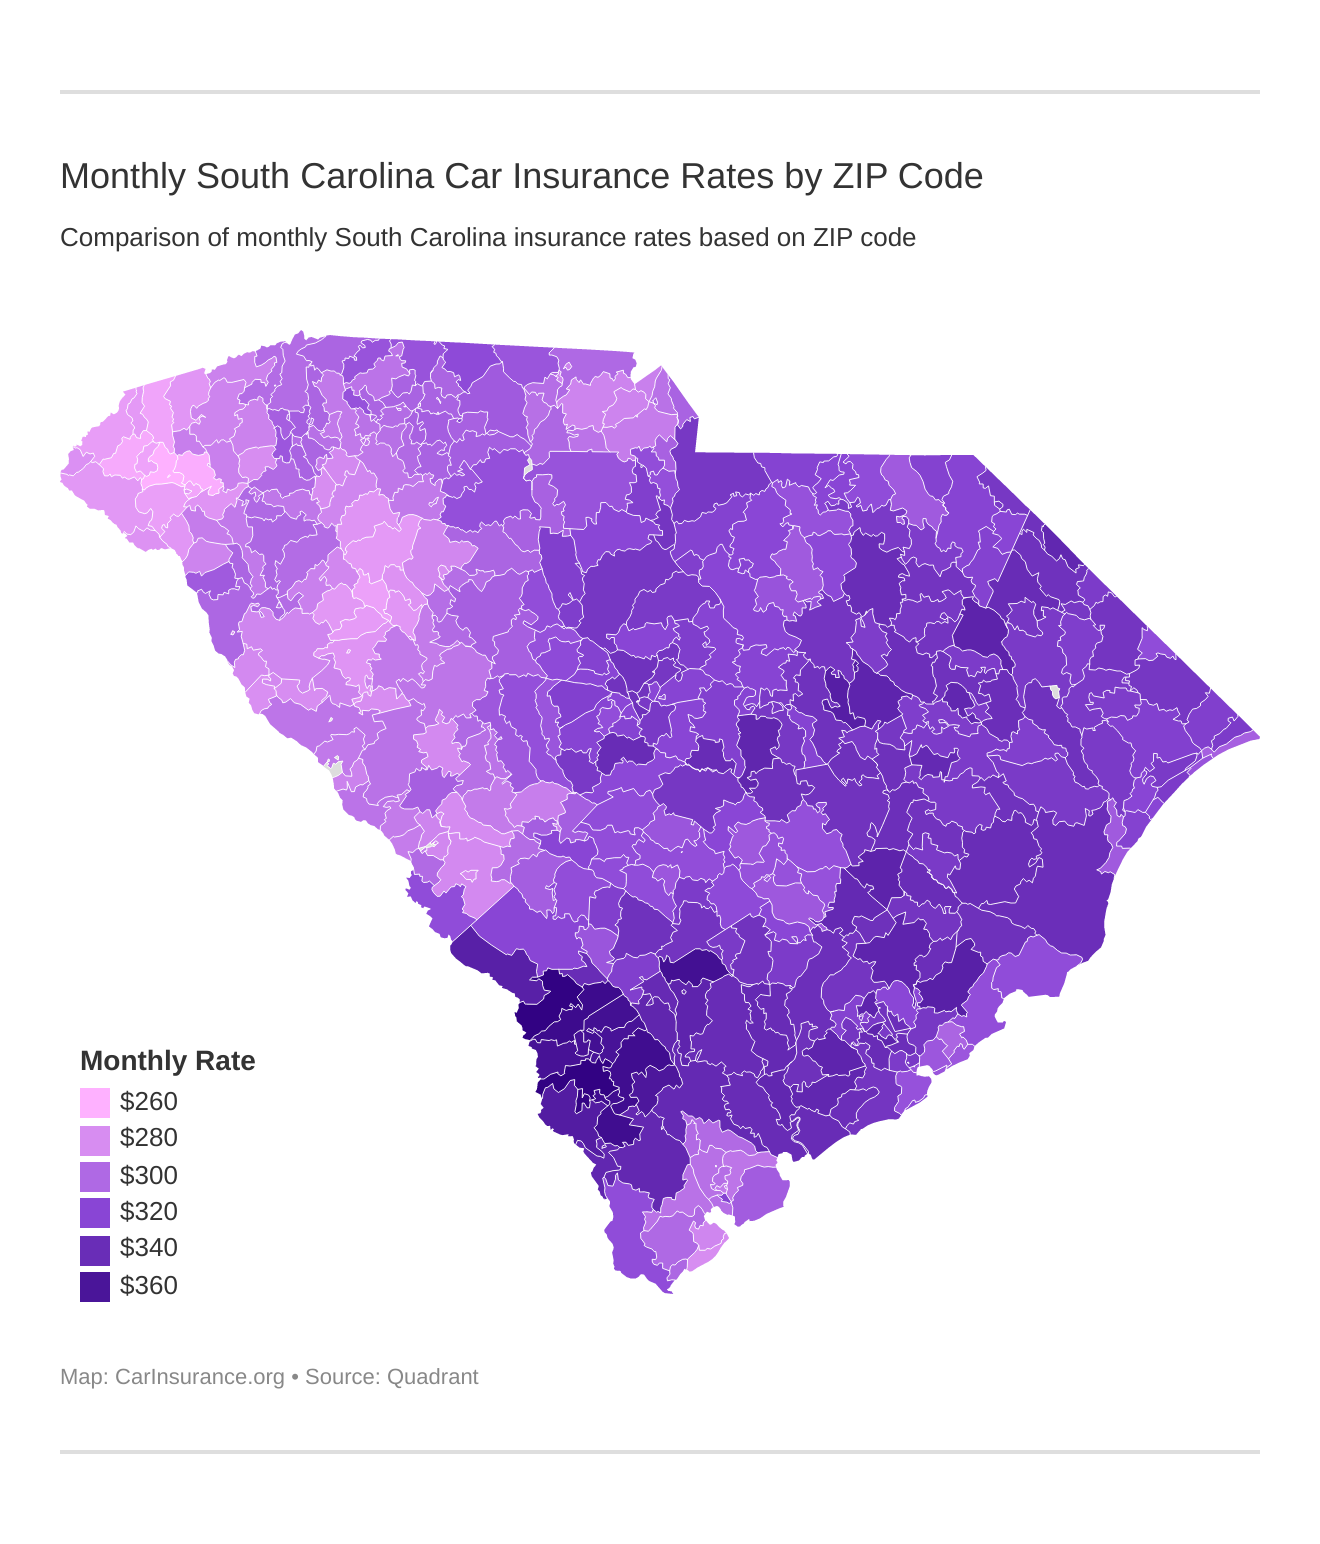 Monthly South Carolina Car Insurance Rates by ZIP Code